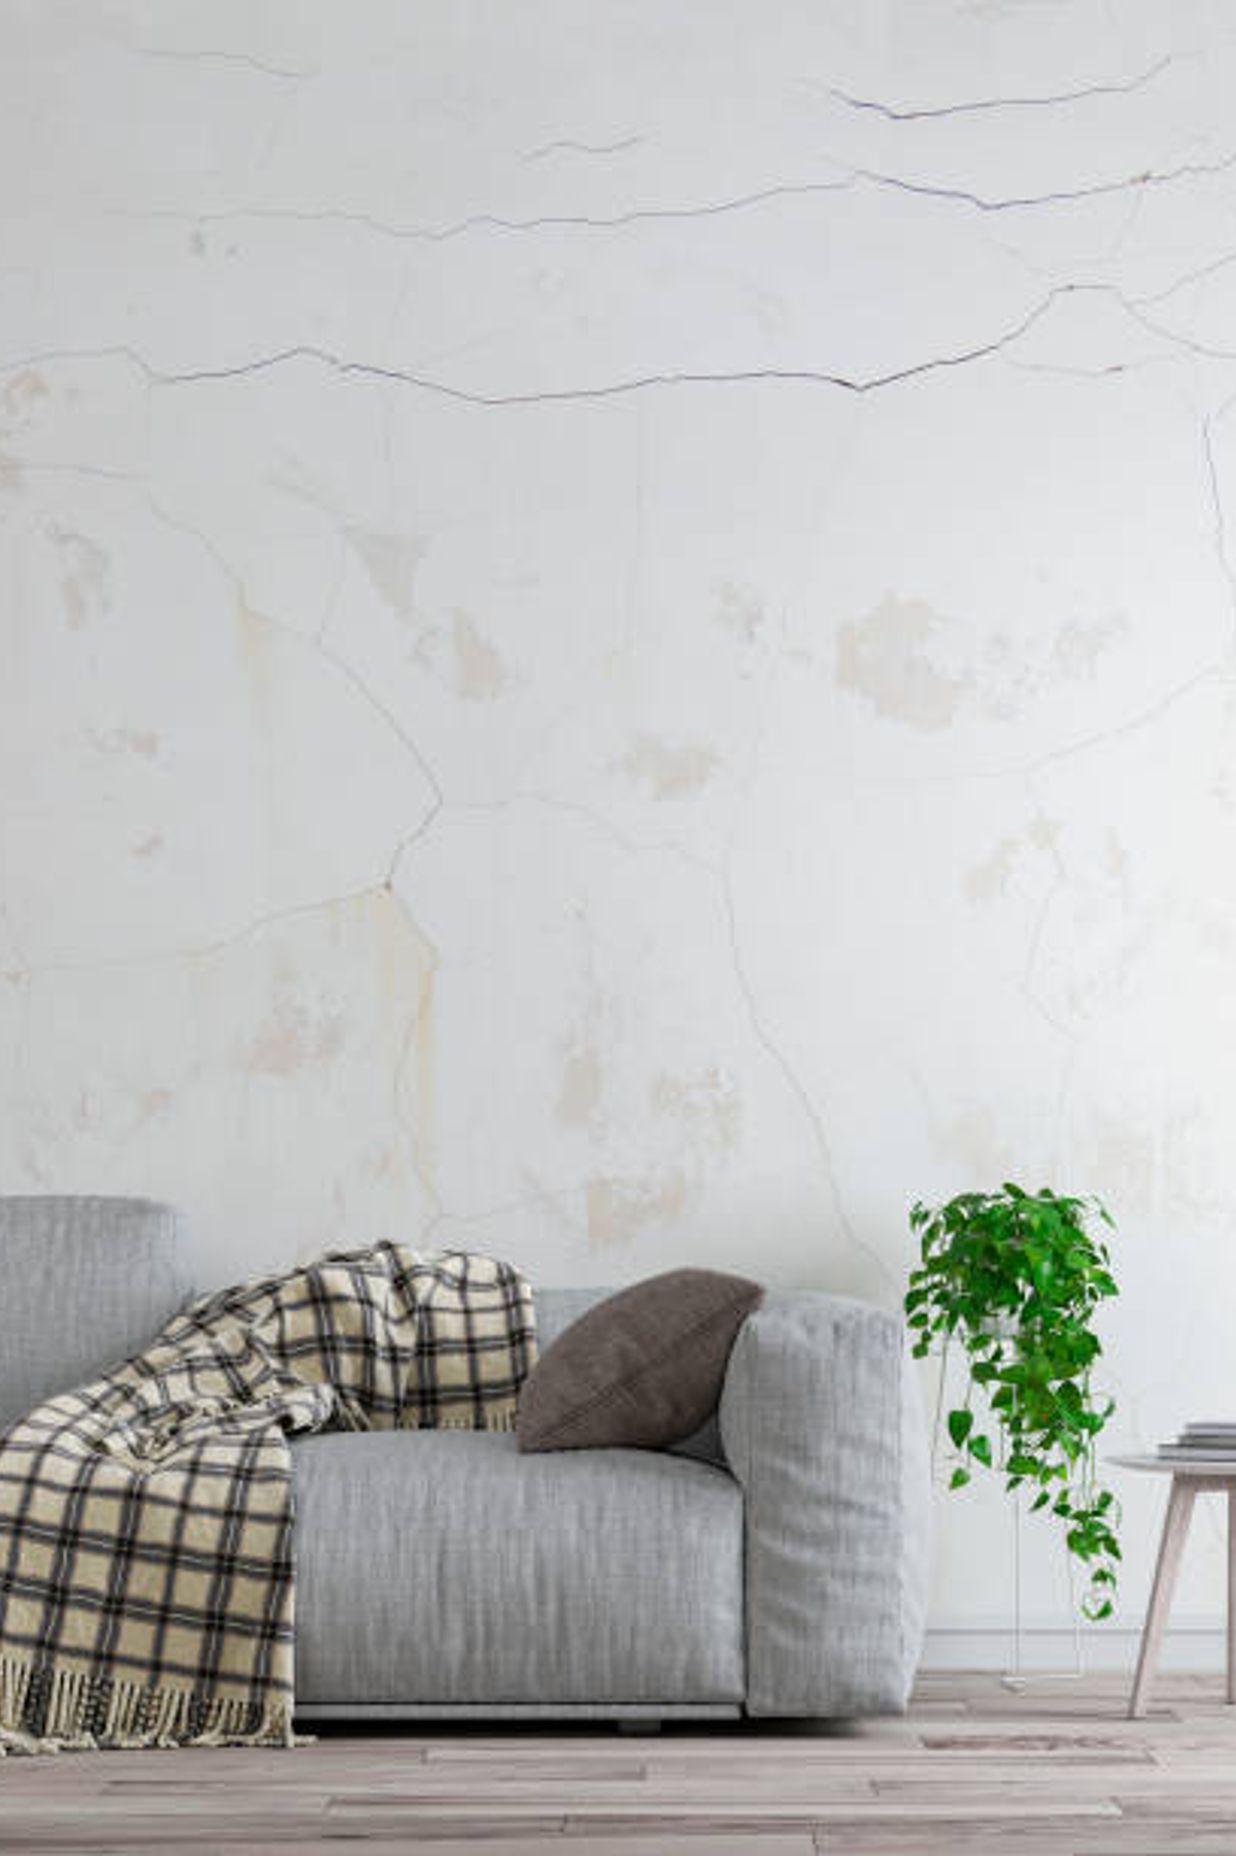 Example of house with cracked walls | Photo Credit – iStock